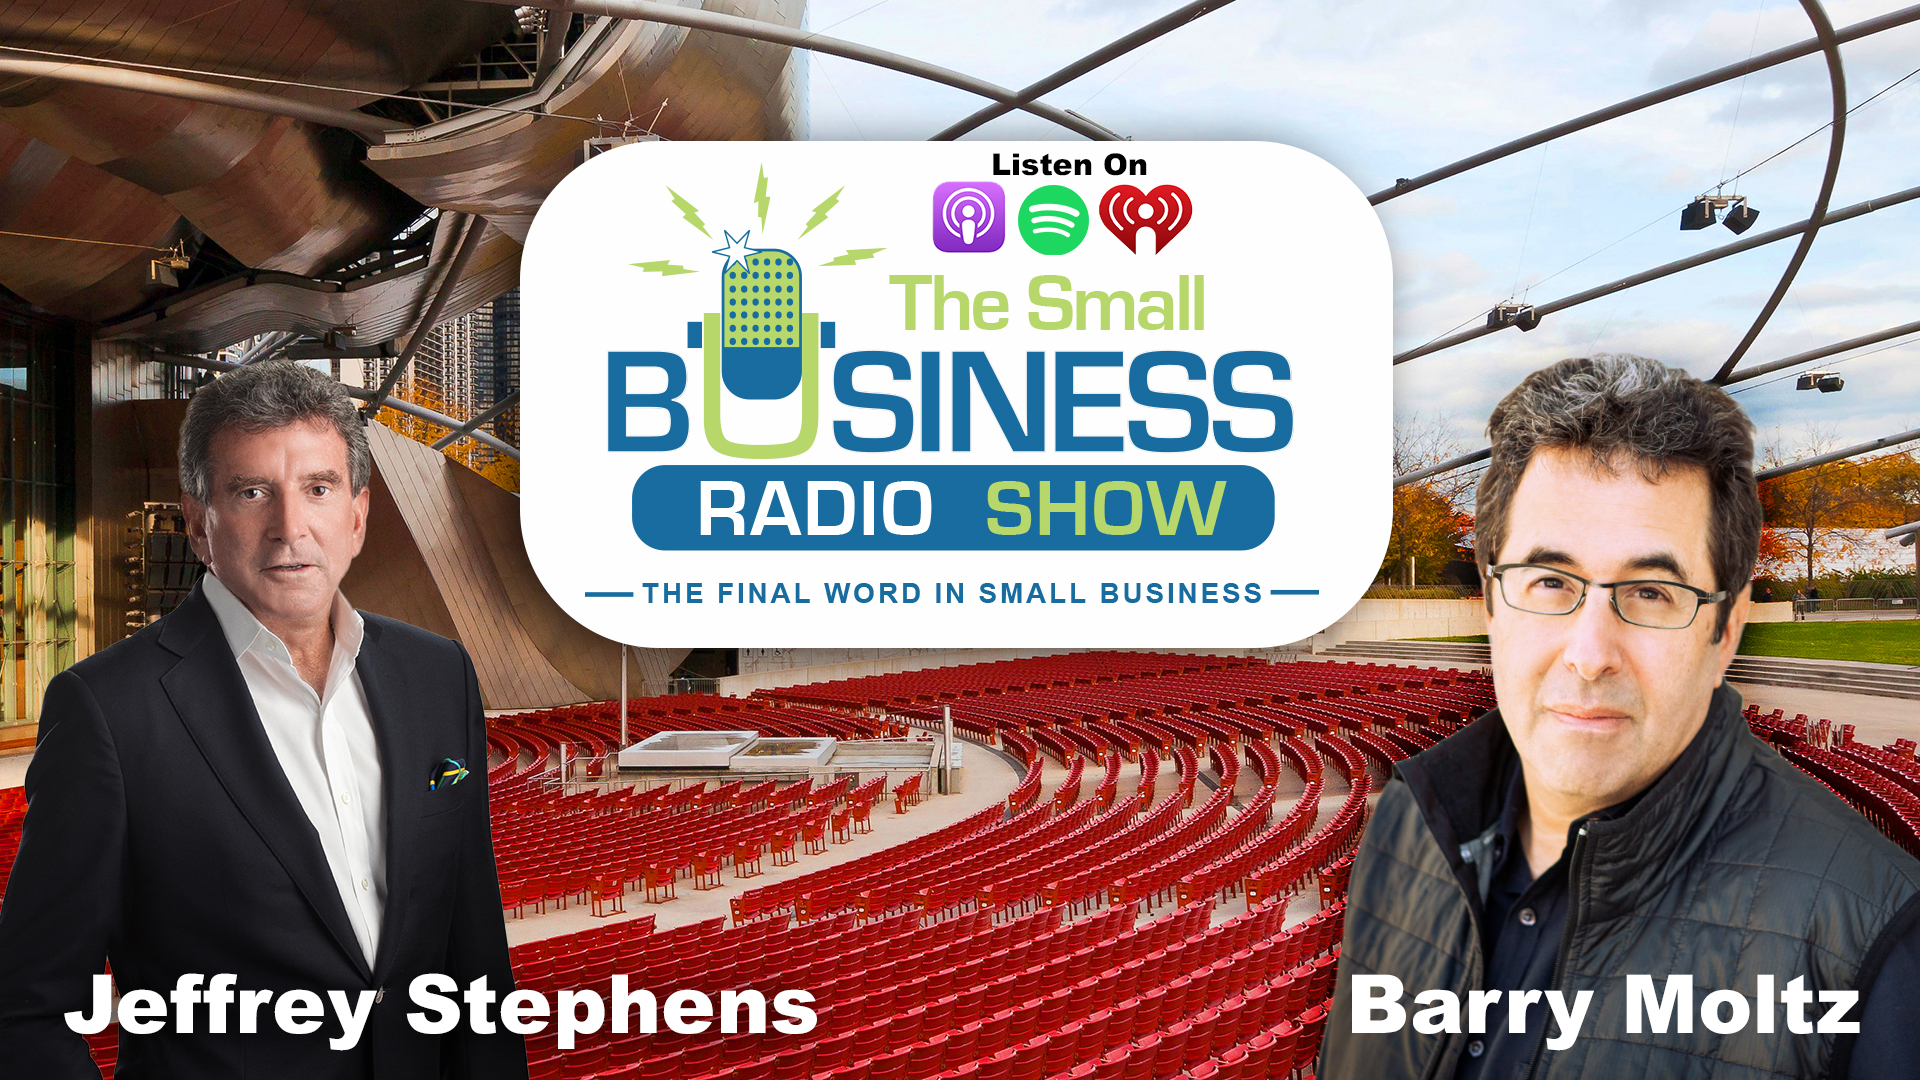 Jeffrey Stephens on The Small Business Radio Show